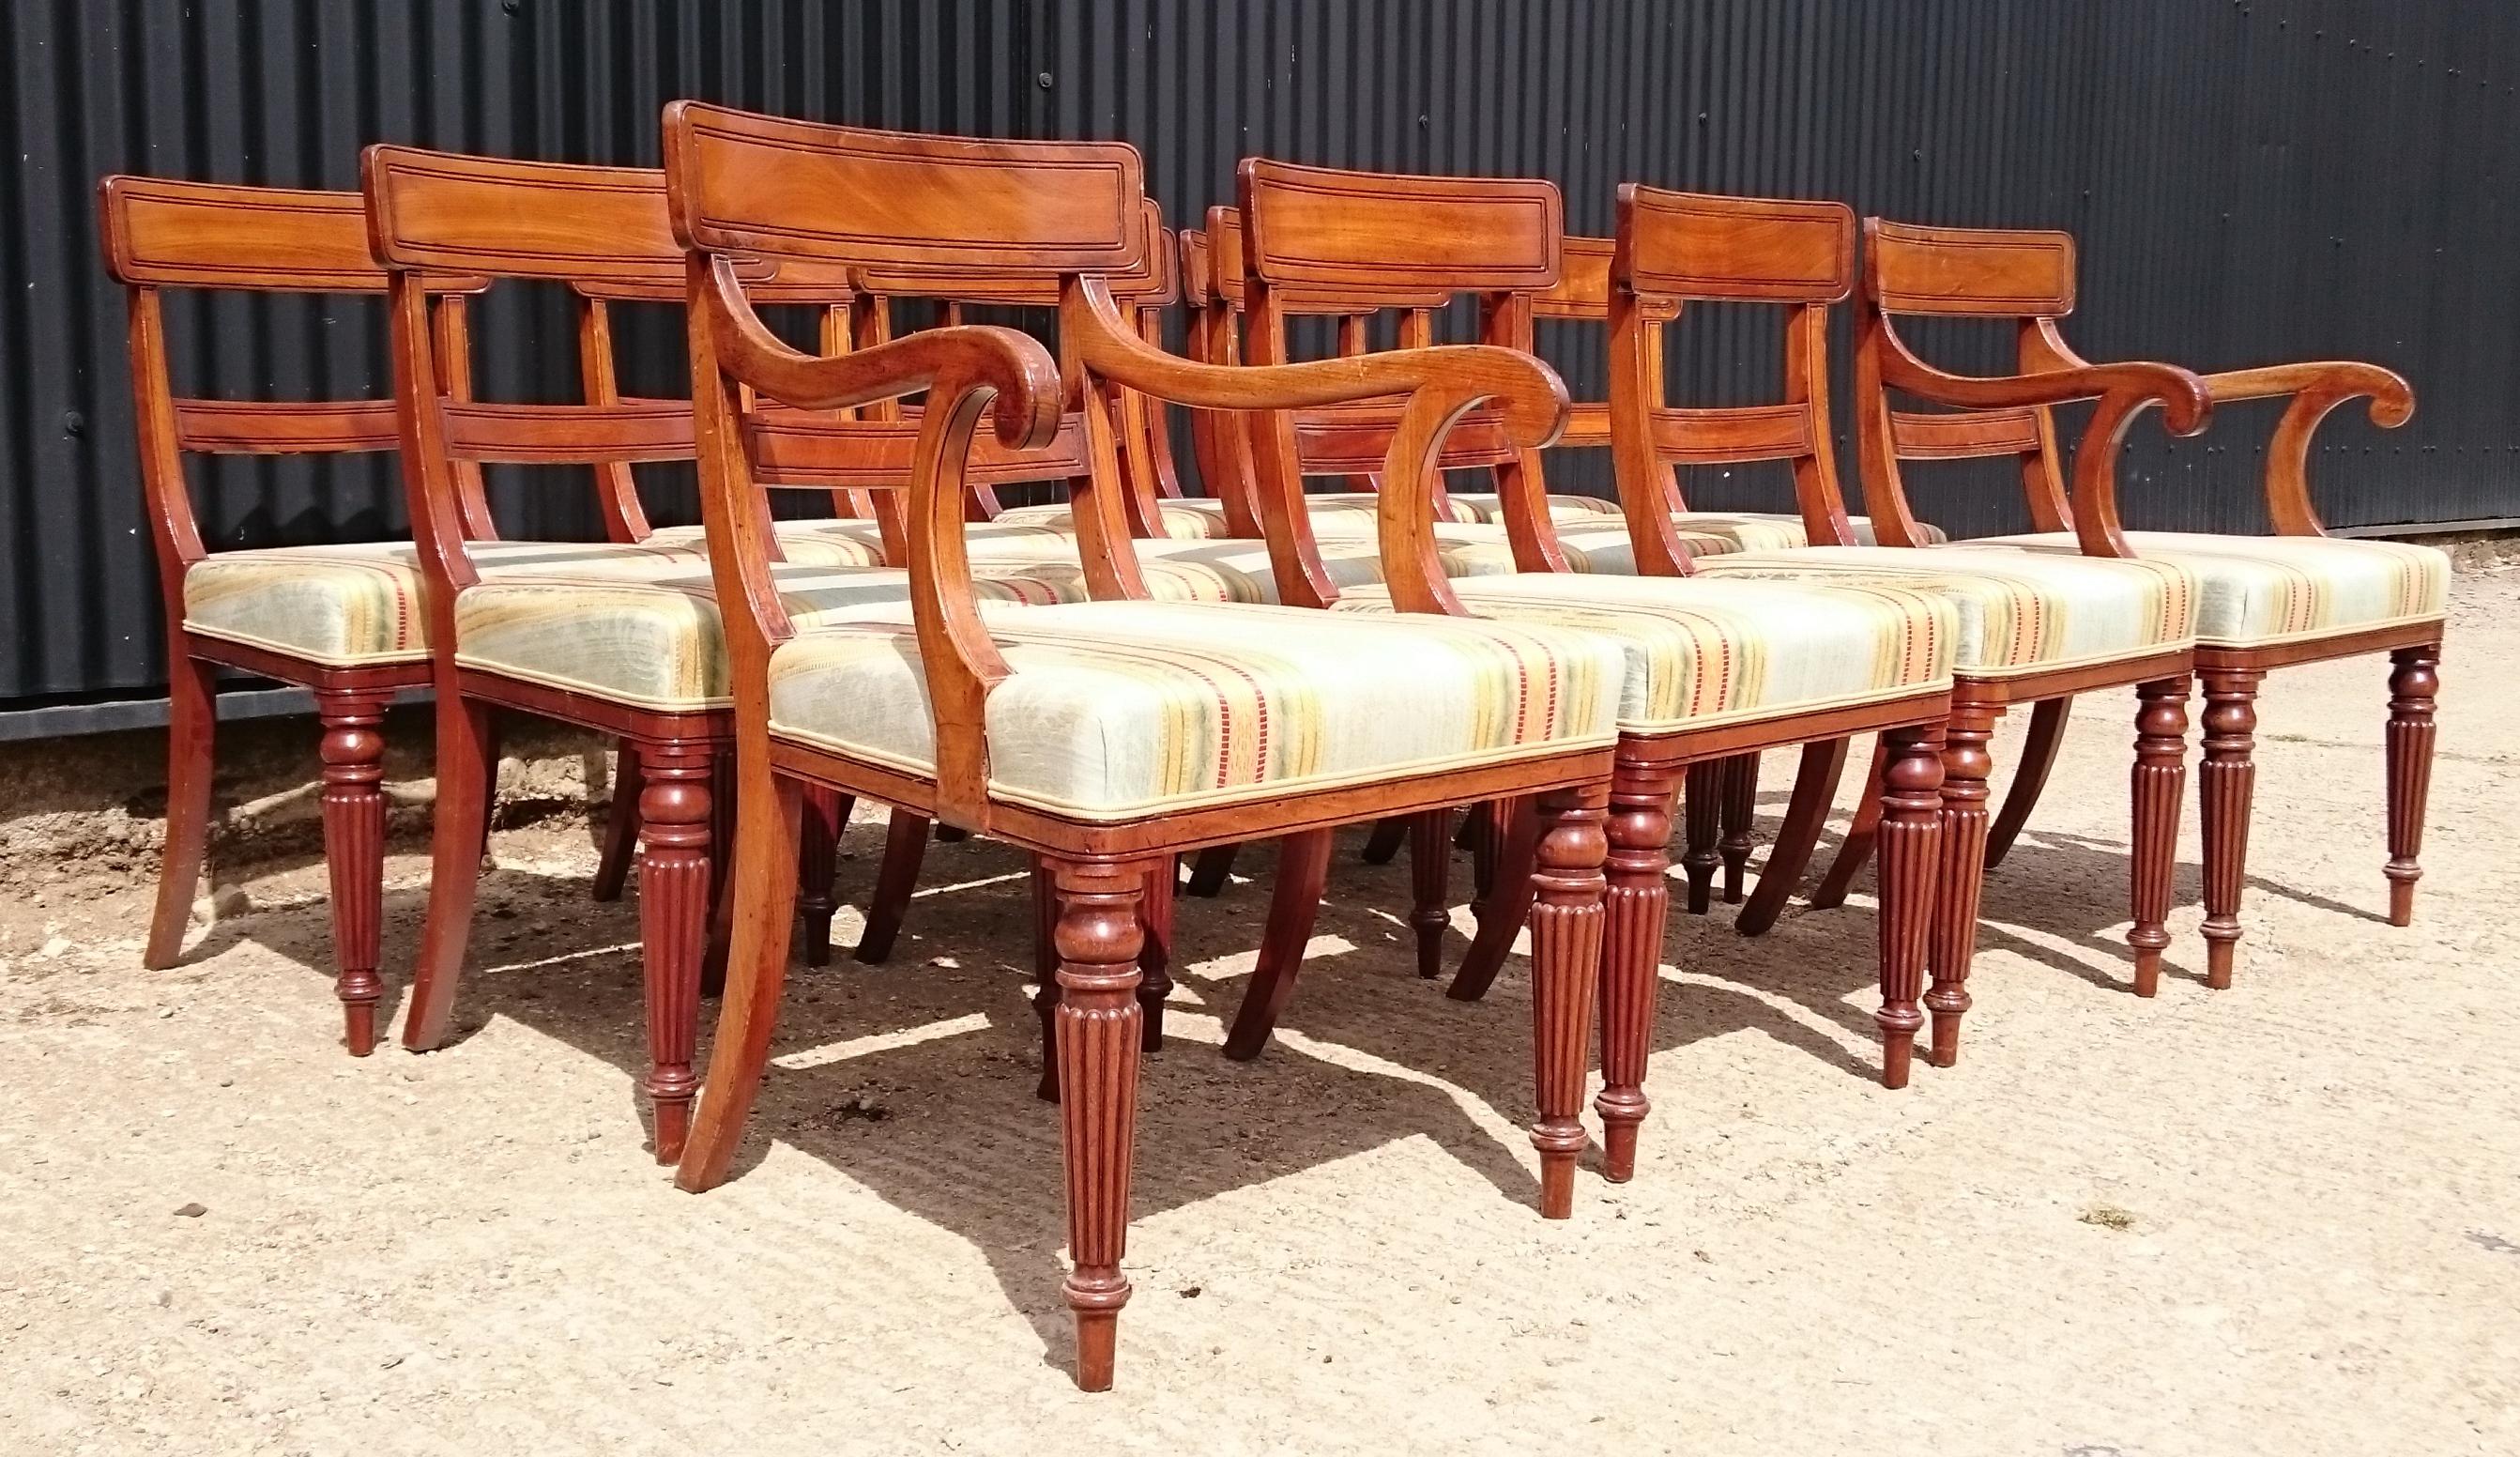 British Set of Twelve Early 19th Century Regency Mahogany Antique Dining Chairs